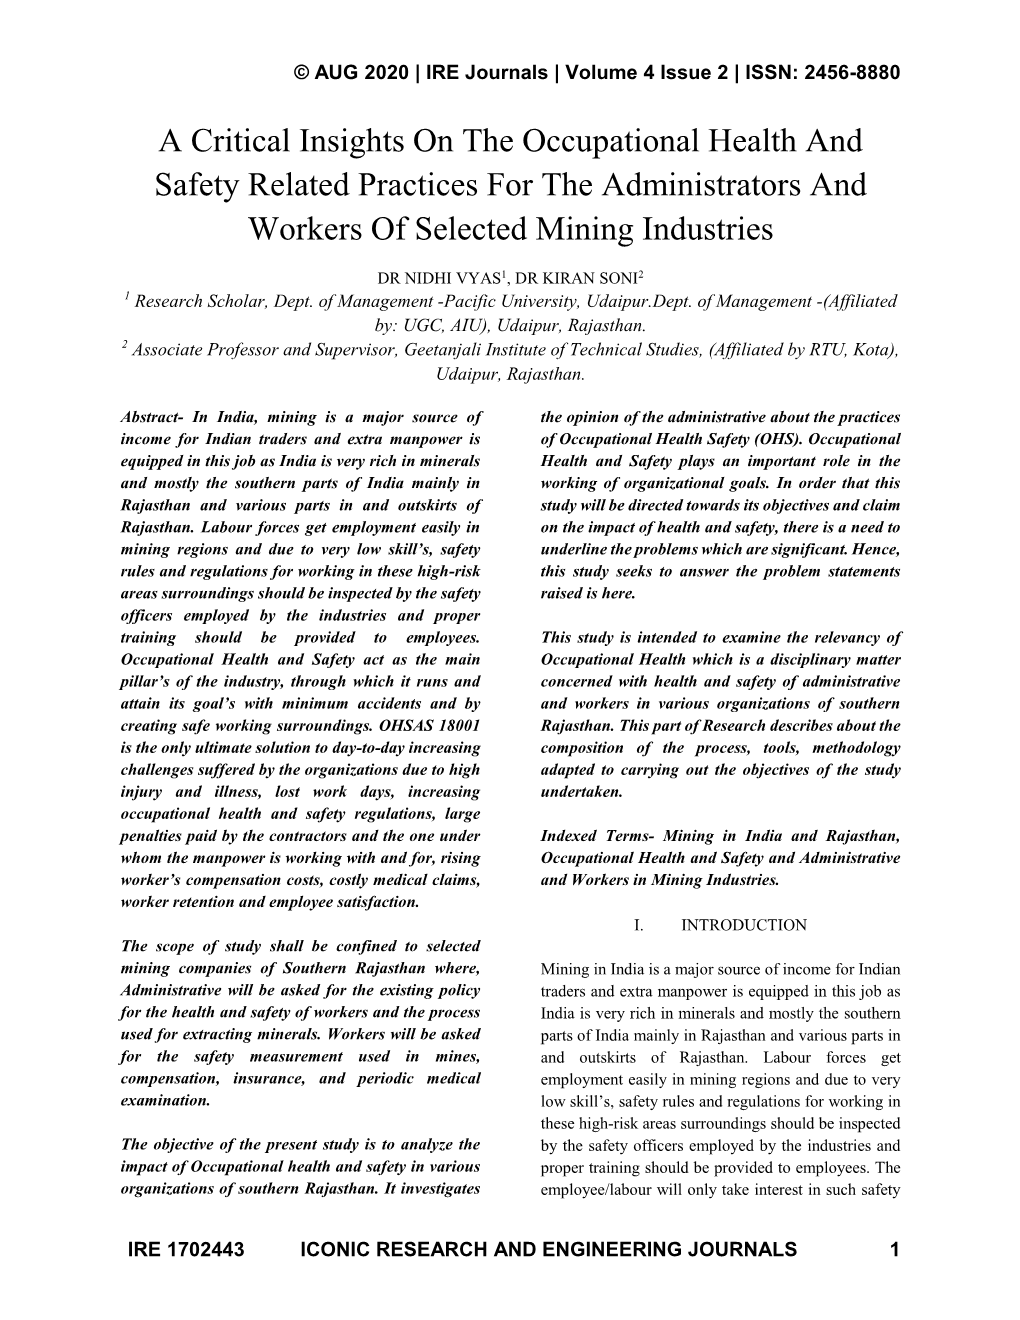 A Critical Insights on the Occupational Health and Safety Related Practices for the Administrators and Workers of Selected Mining Industries